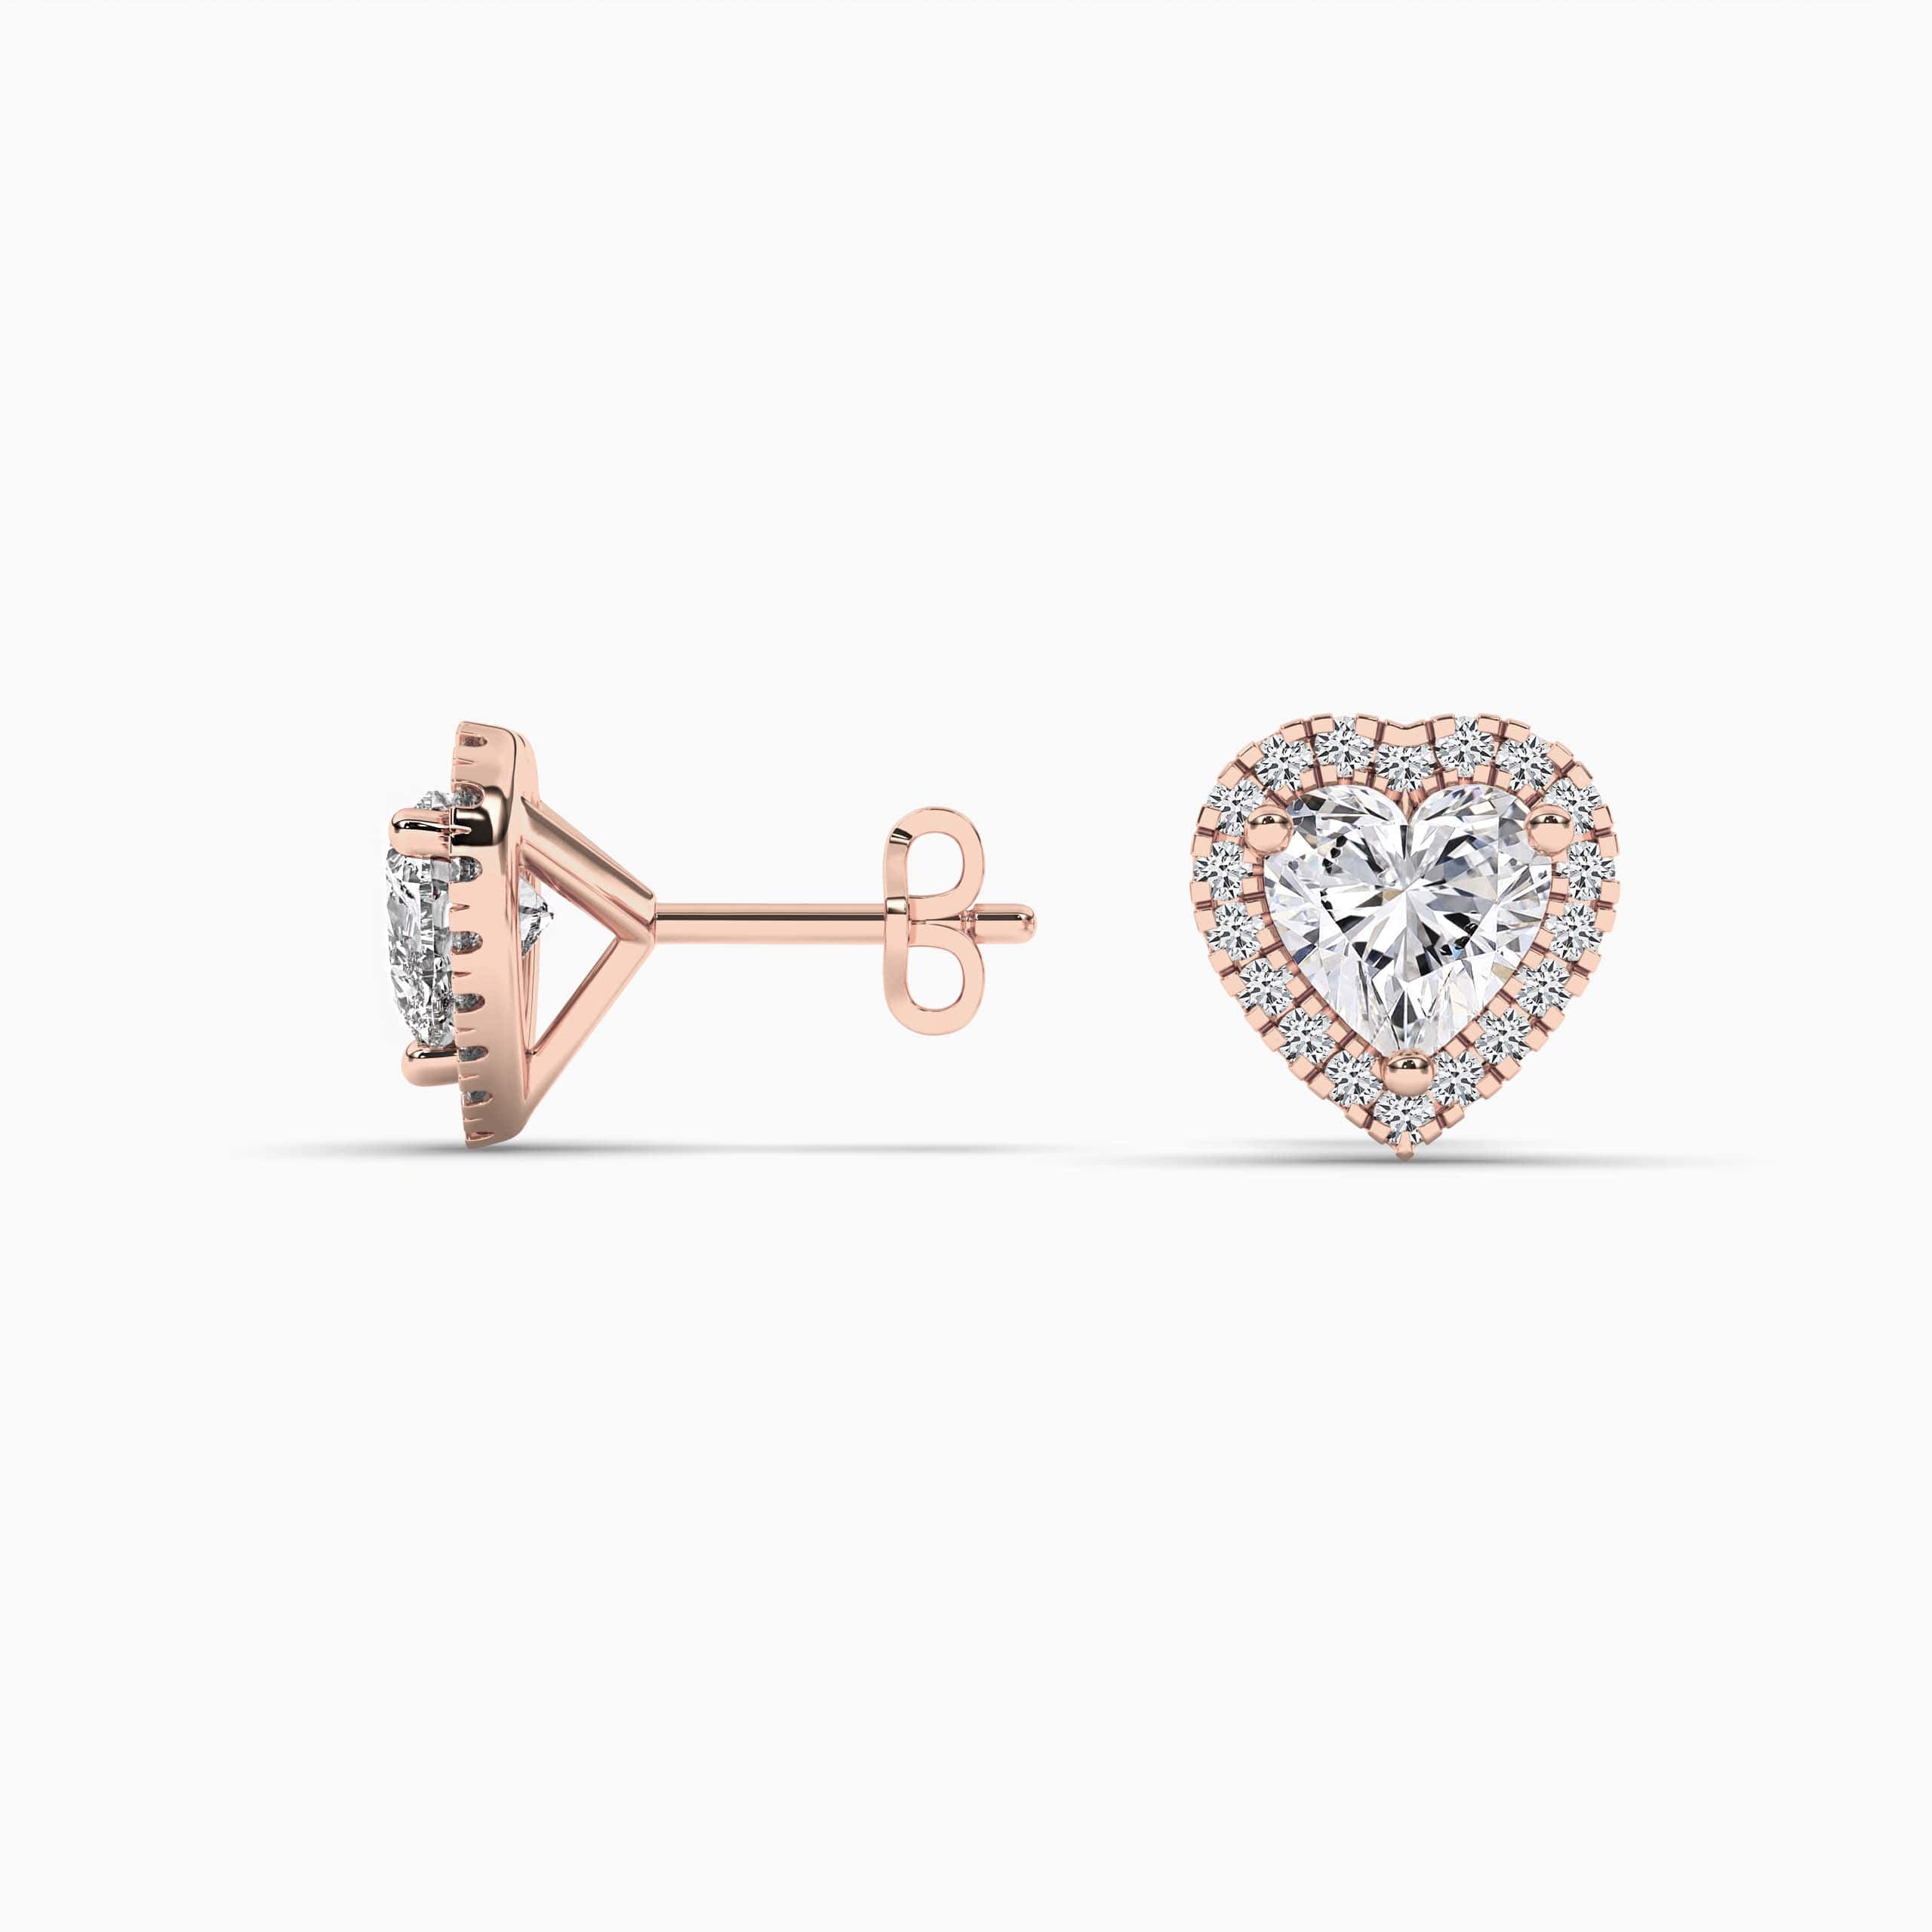 HEART STUD EARRINGS WITH DIAMONDS, ROSE GOLD